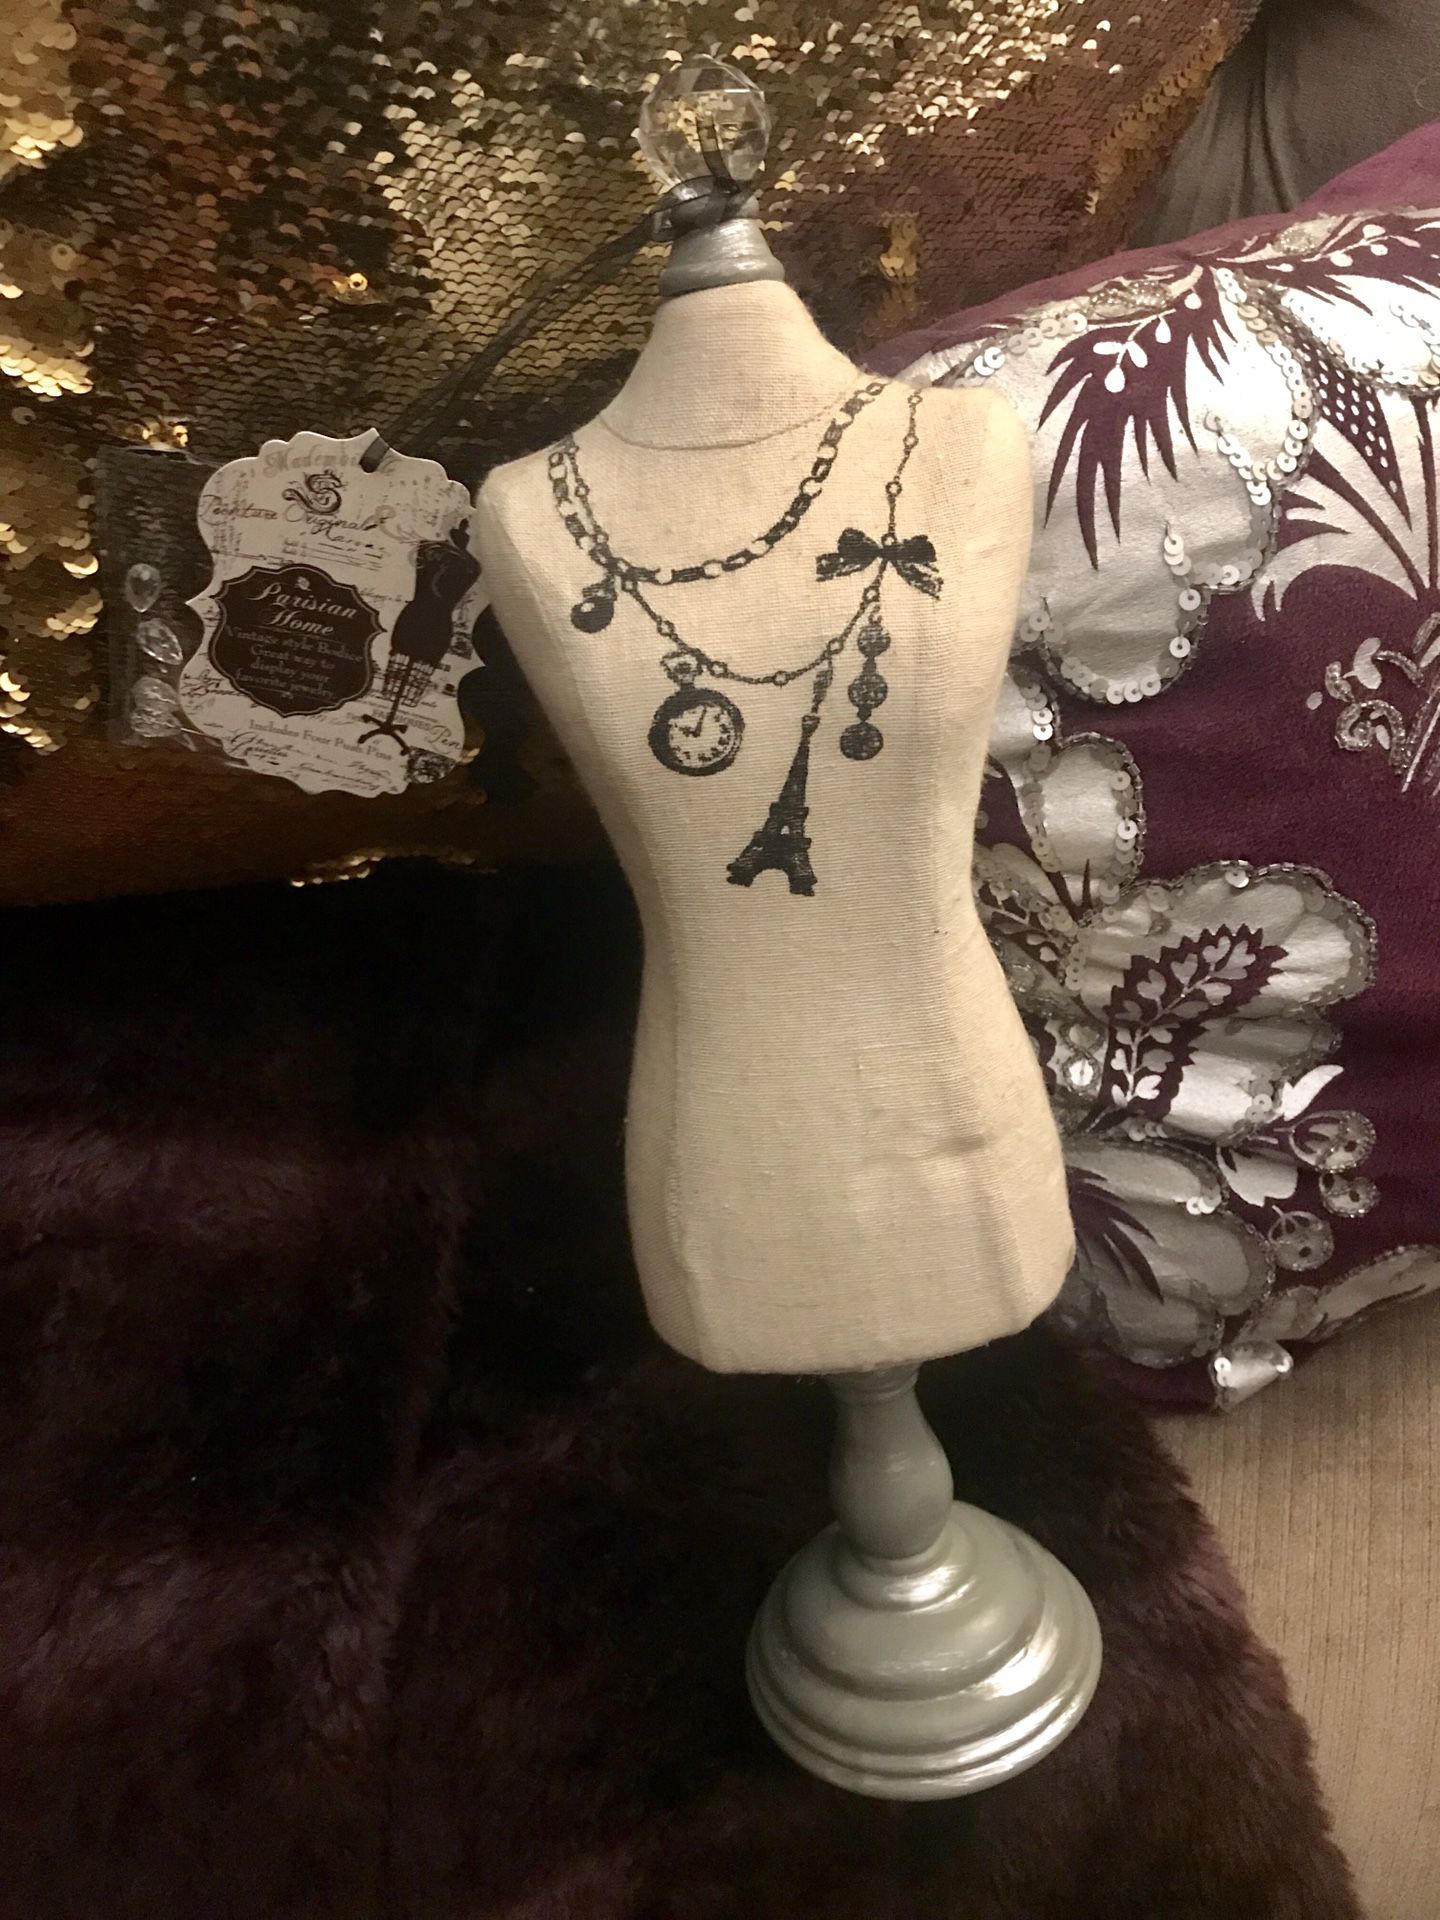 Parisian Home vintage style jewelry bodice for Sale in Saint